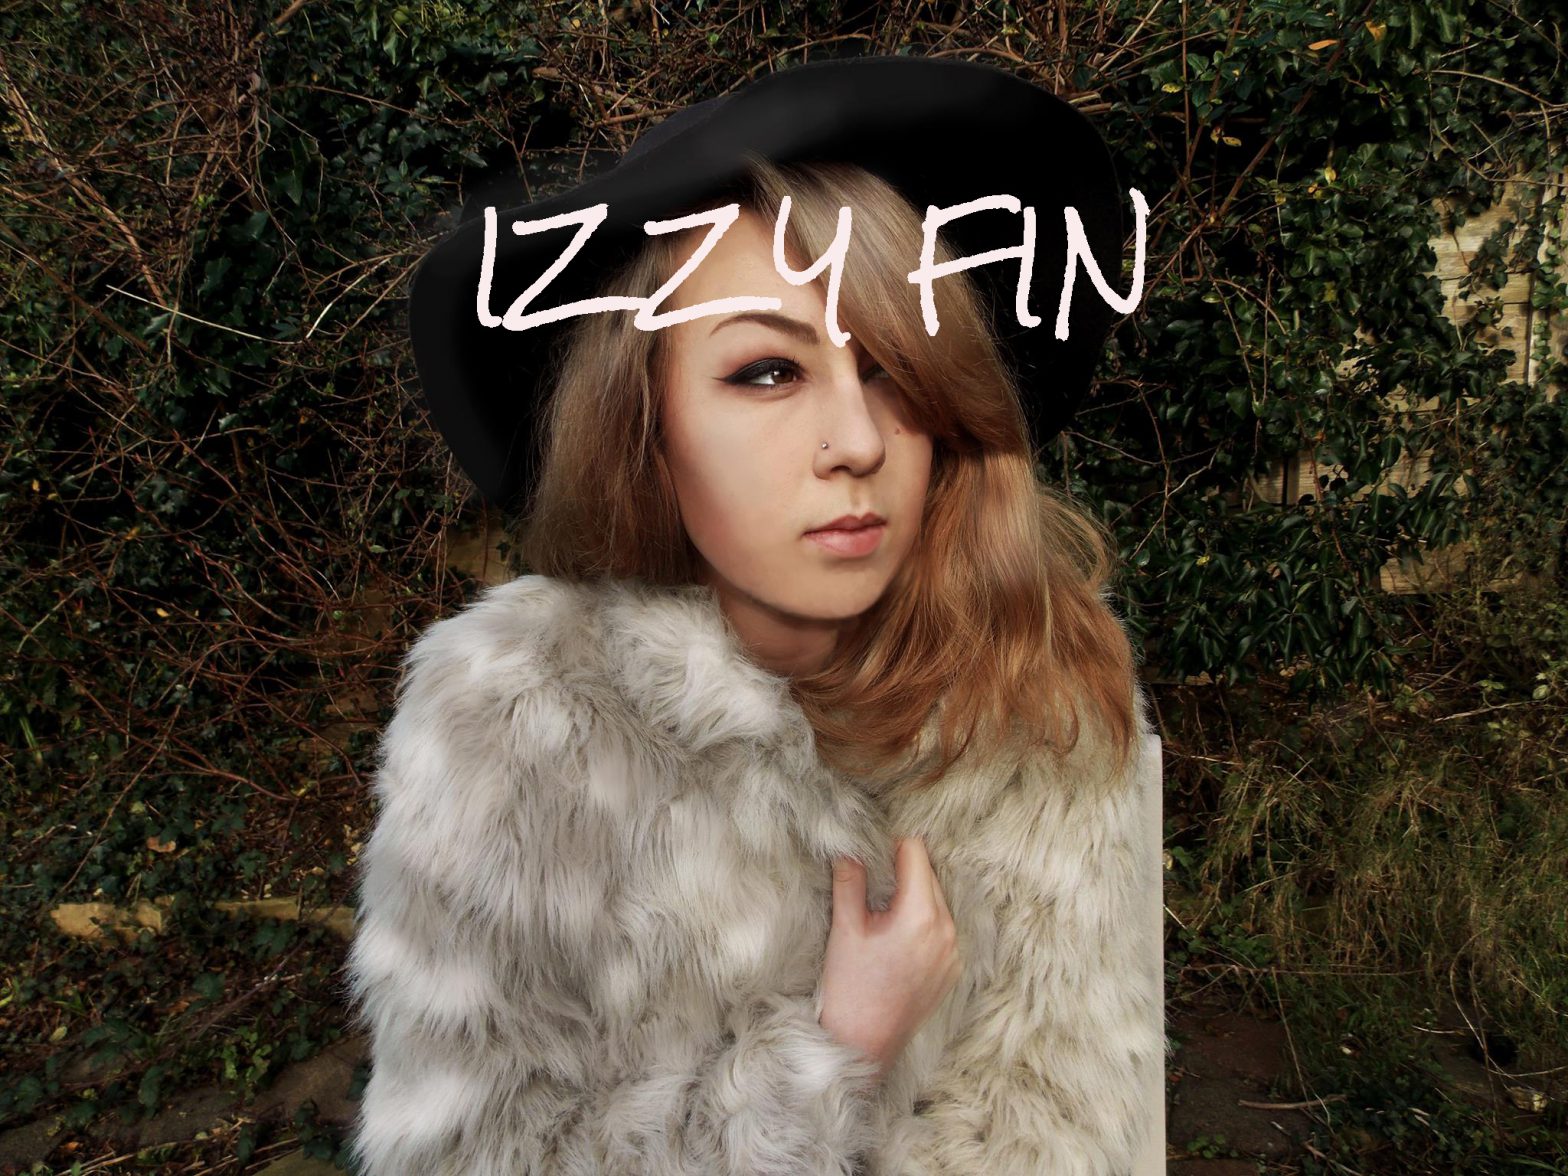 Izzy fin unsigned artists album cover